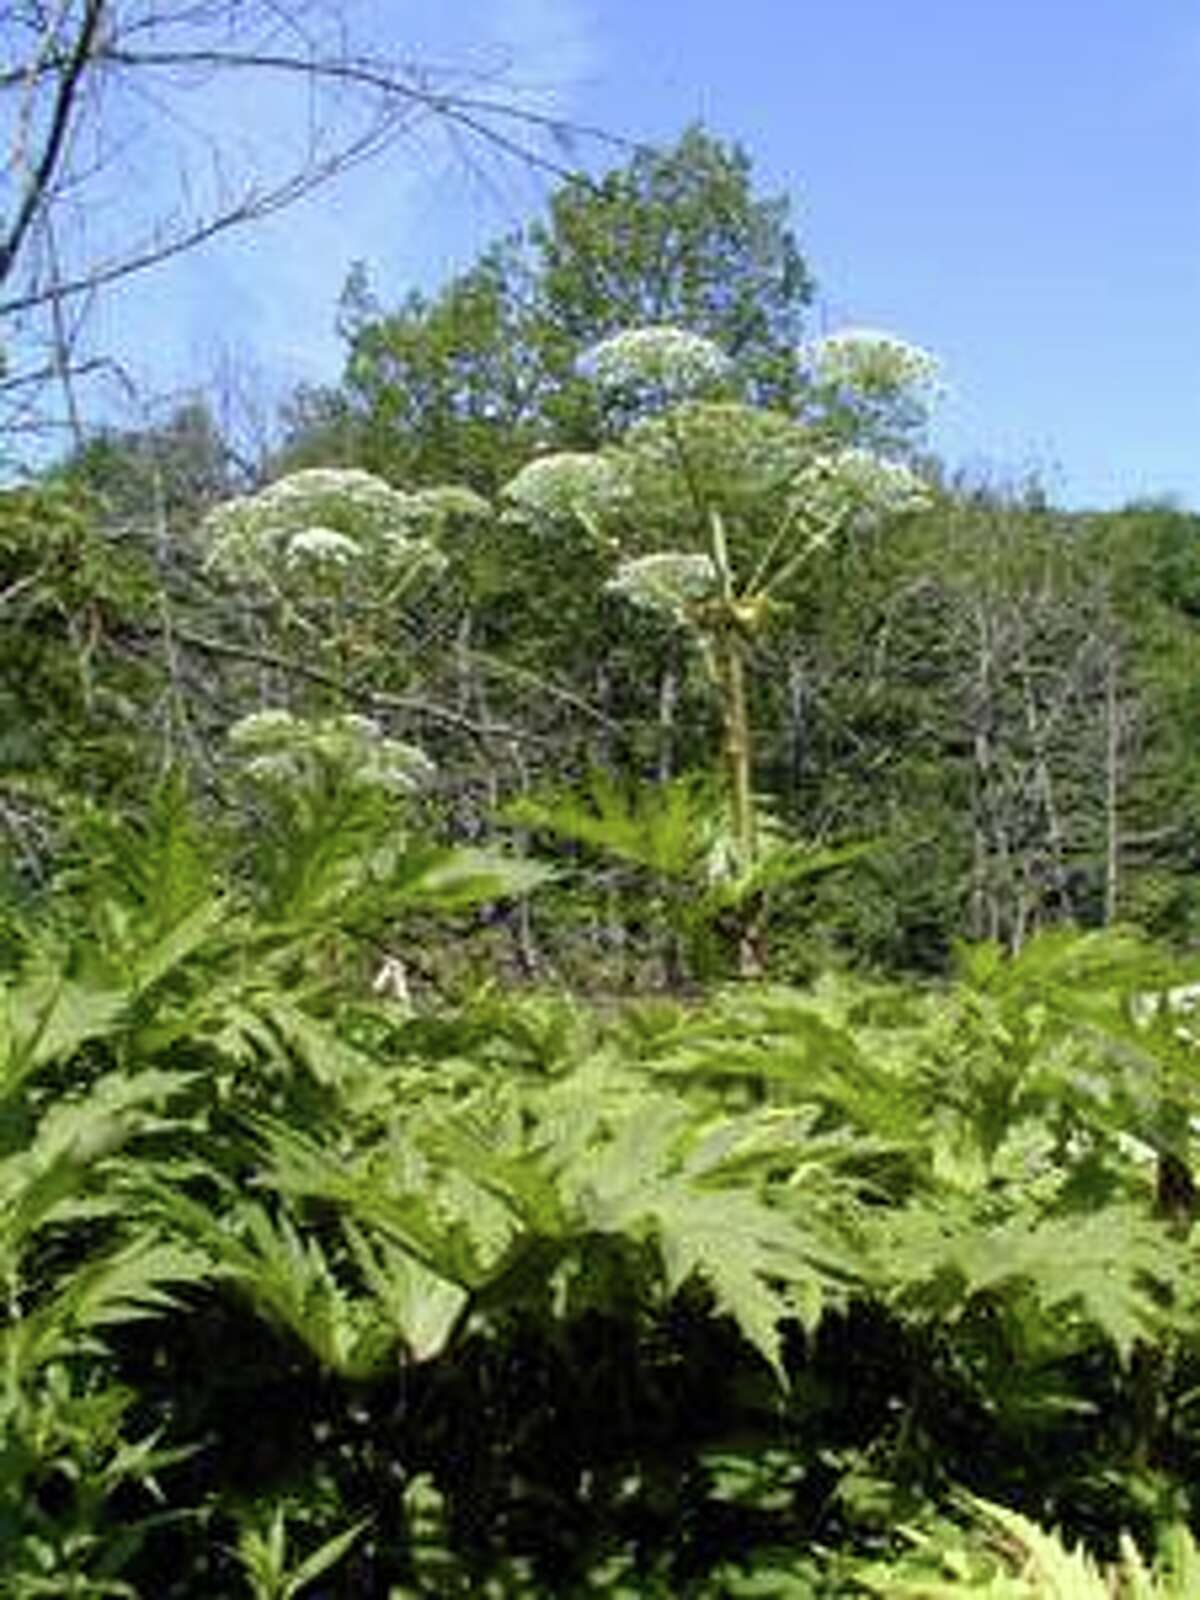 Giant hogweed is a non-native plant from Eurasia that was first identified in Connecticut in 2001, according to a release put out last year by the University of Connecticut’s Invasive Plant Working Group. It can cause painful skin blisters and even blindness.